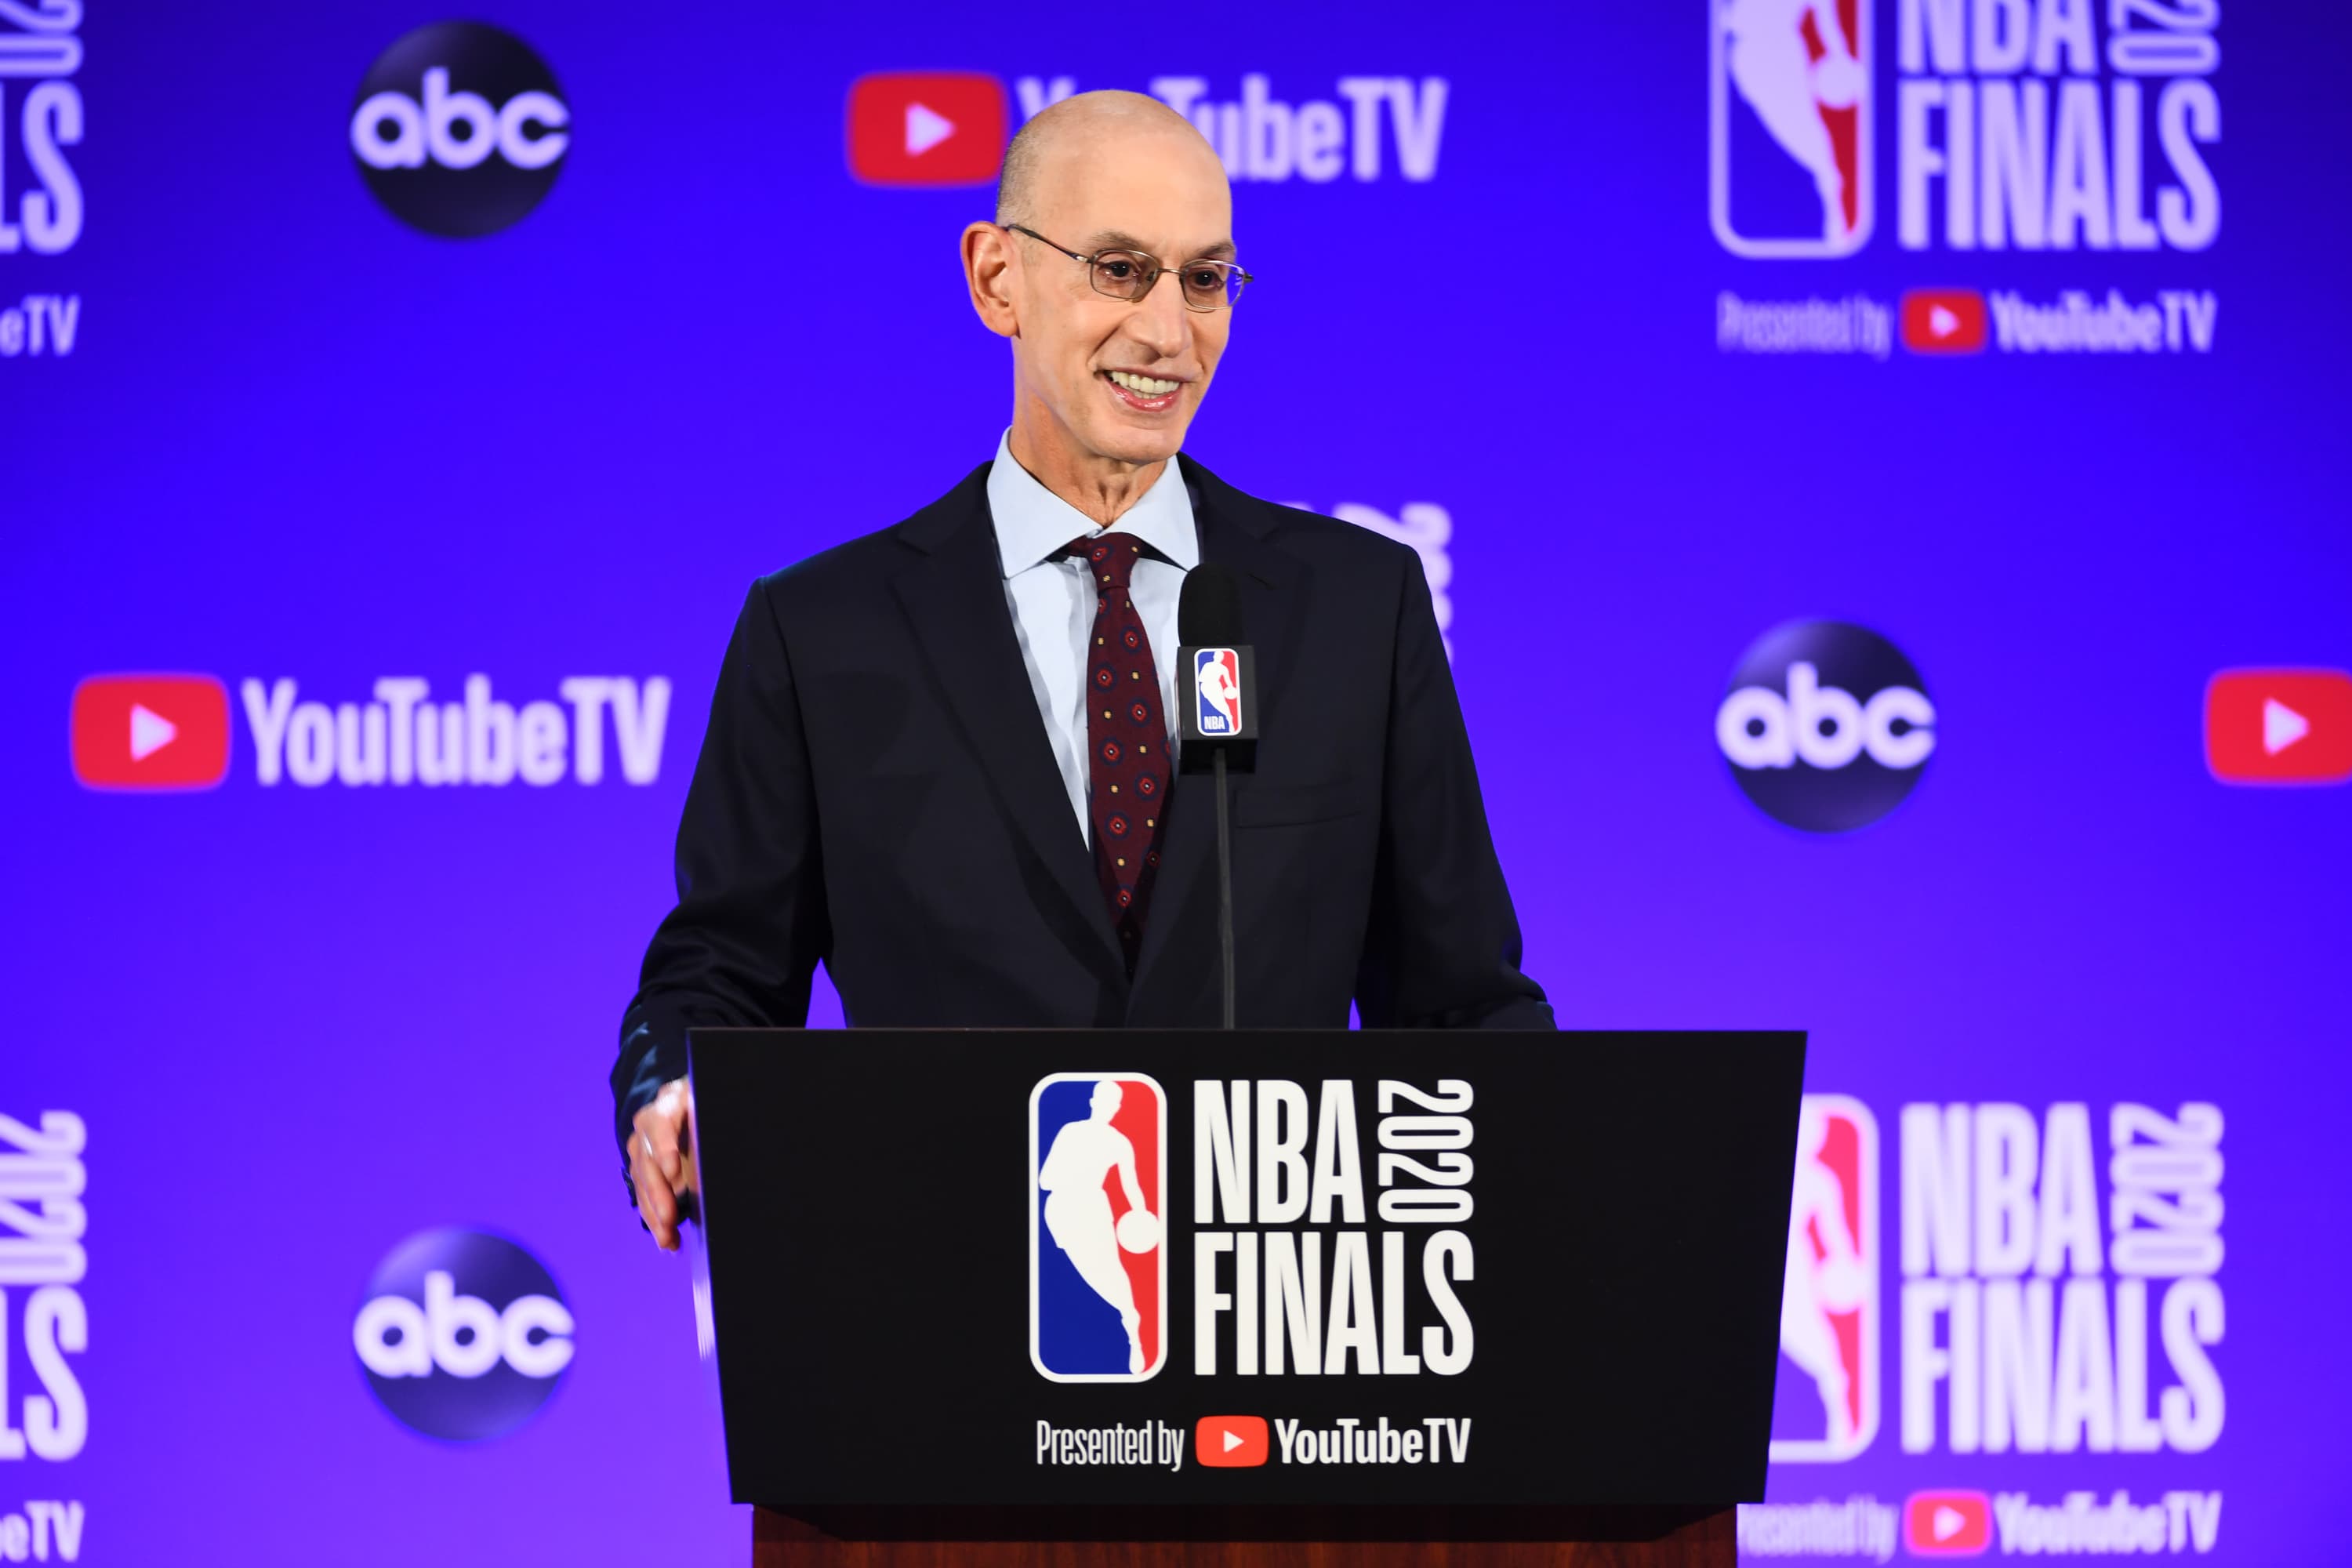 NBA plans for private equity investment in teams